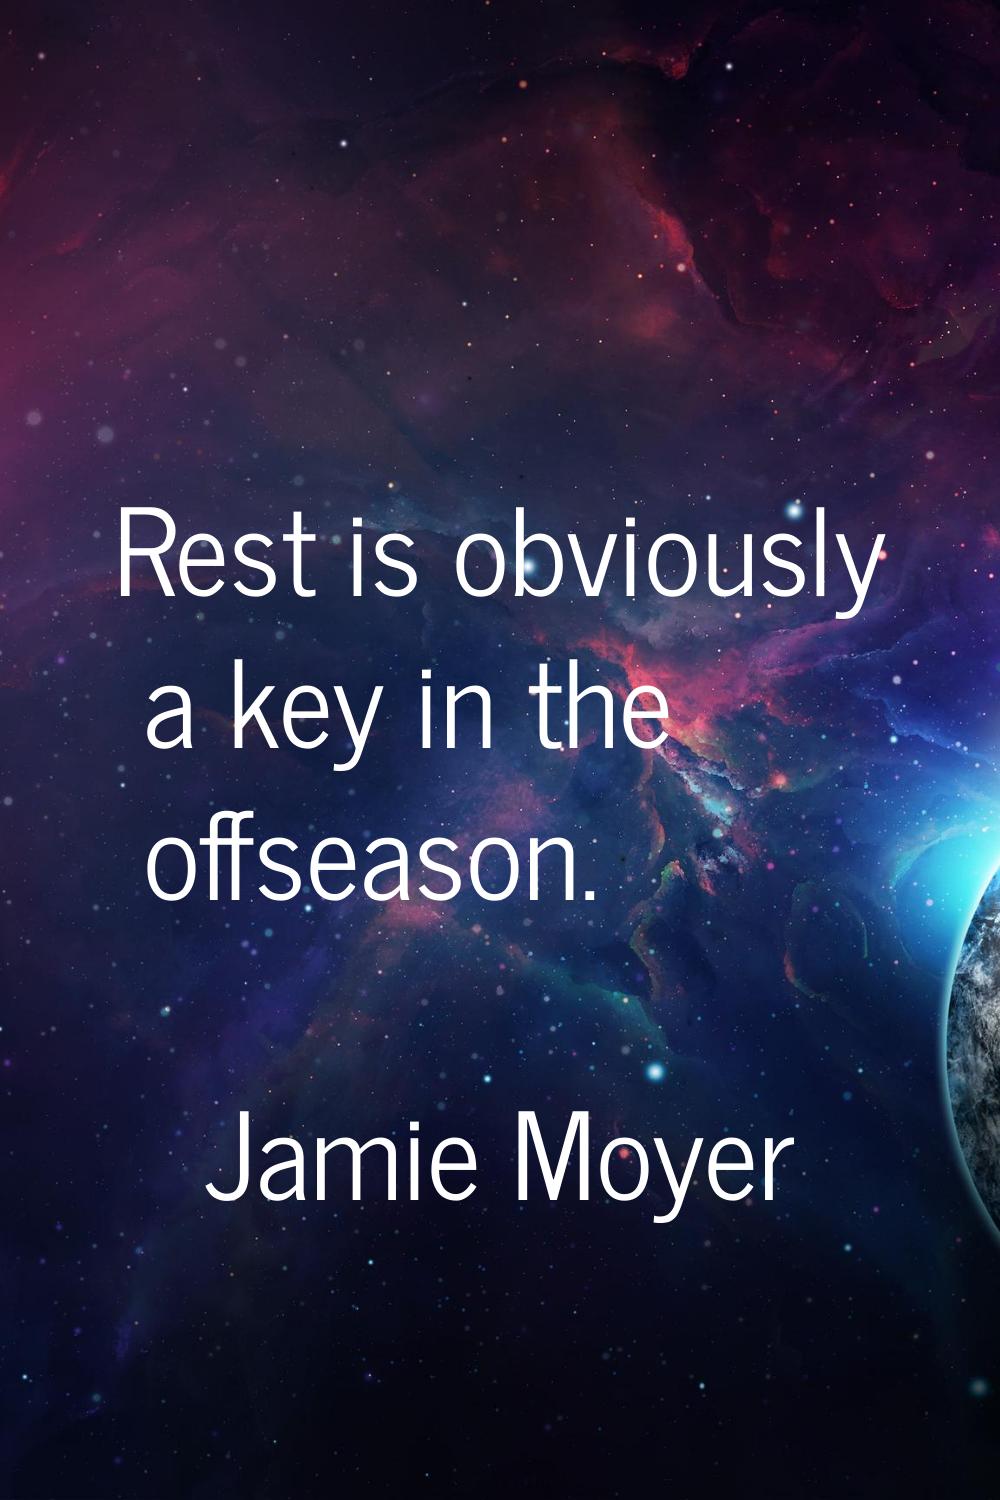 Rest is obviously a key in the offseason.